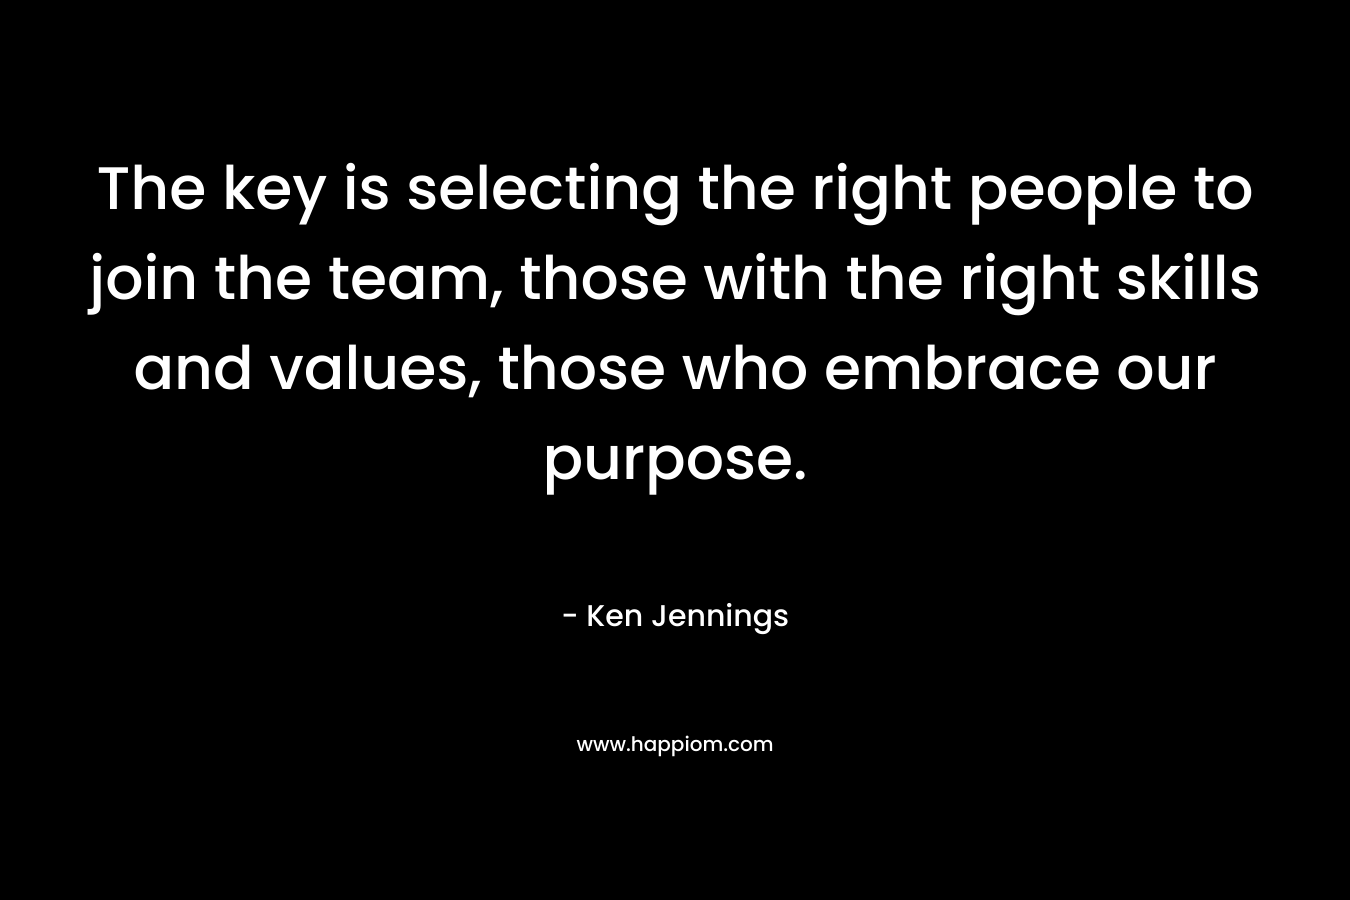 The key is selecting the right people to join the team, those with the right skills and values, those who embrace our purpose.